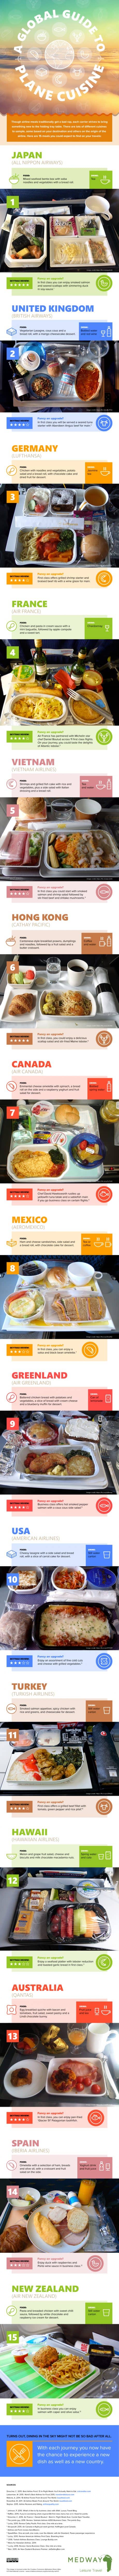 A Global Guide to Airplane Food Infographic